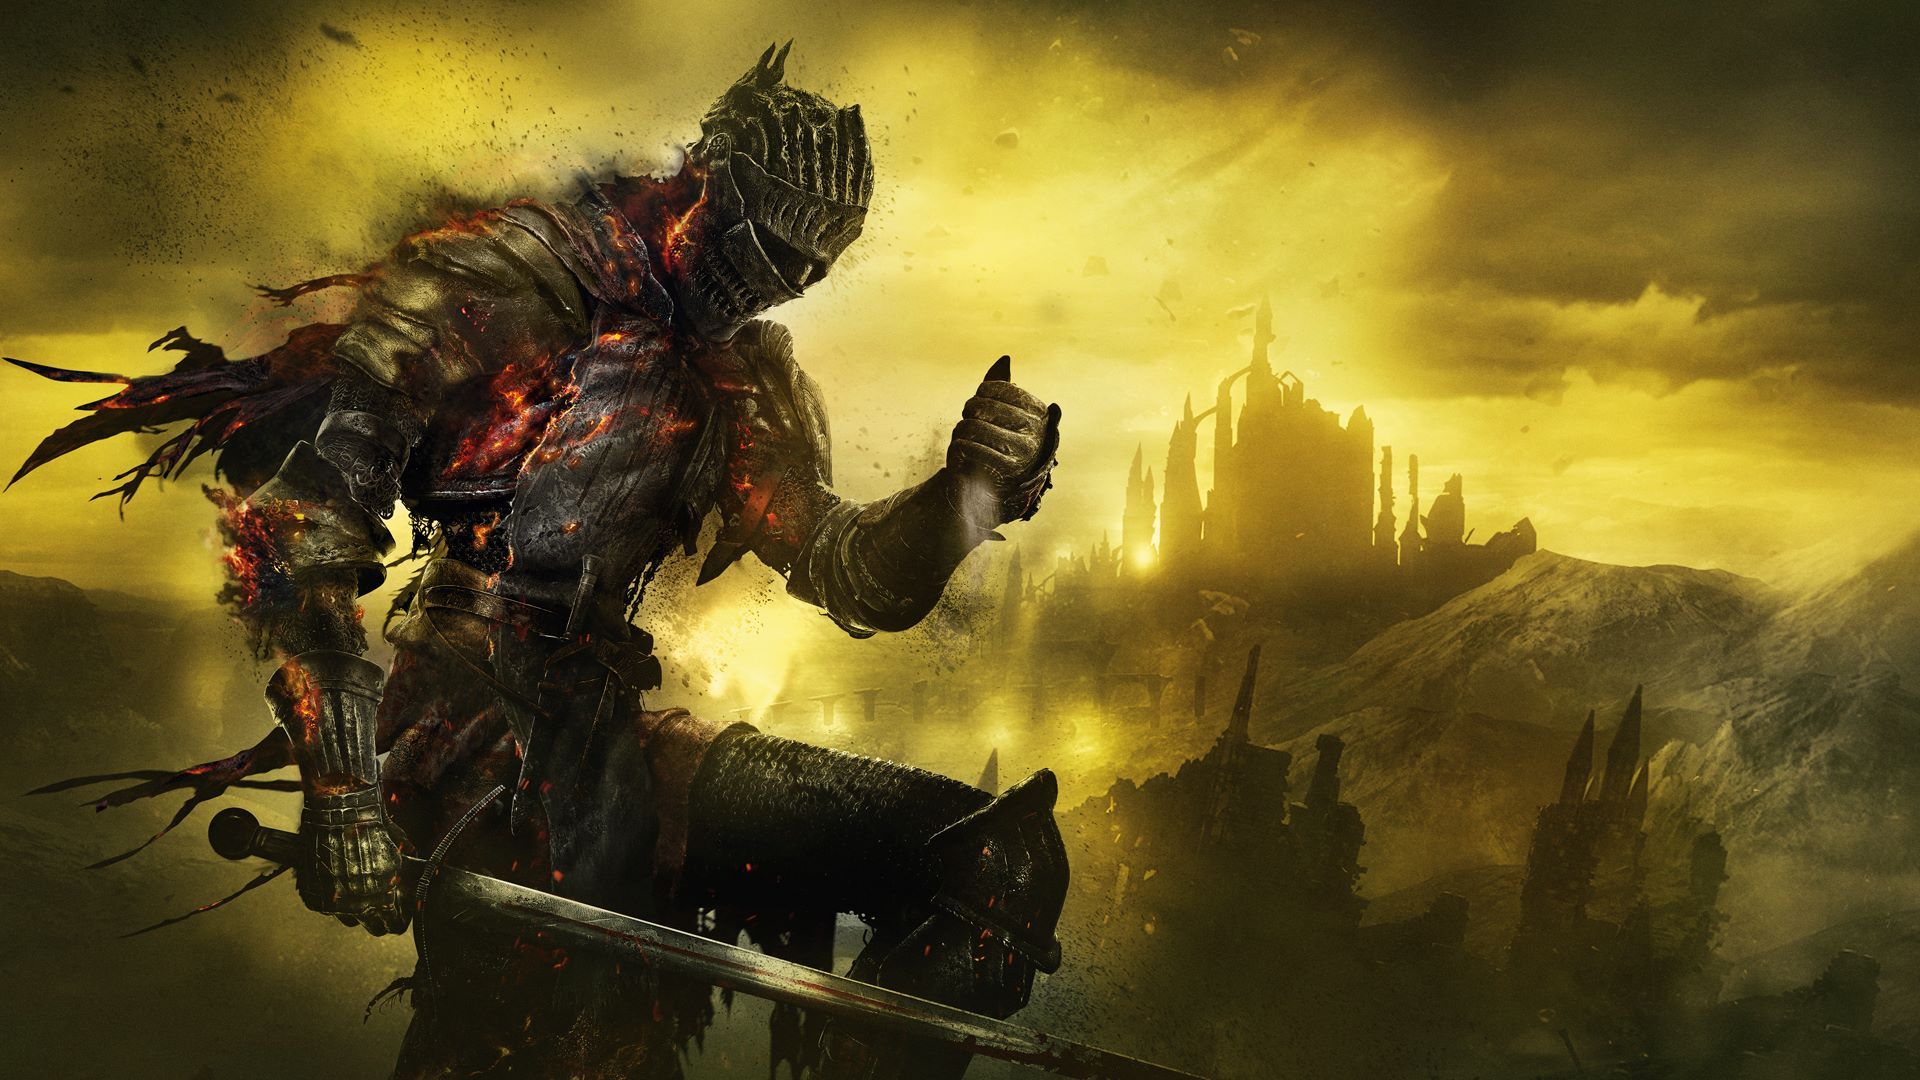 Dark Souls Director Wants To Make A Battle Royale Game